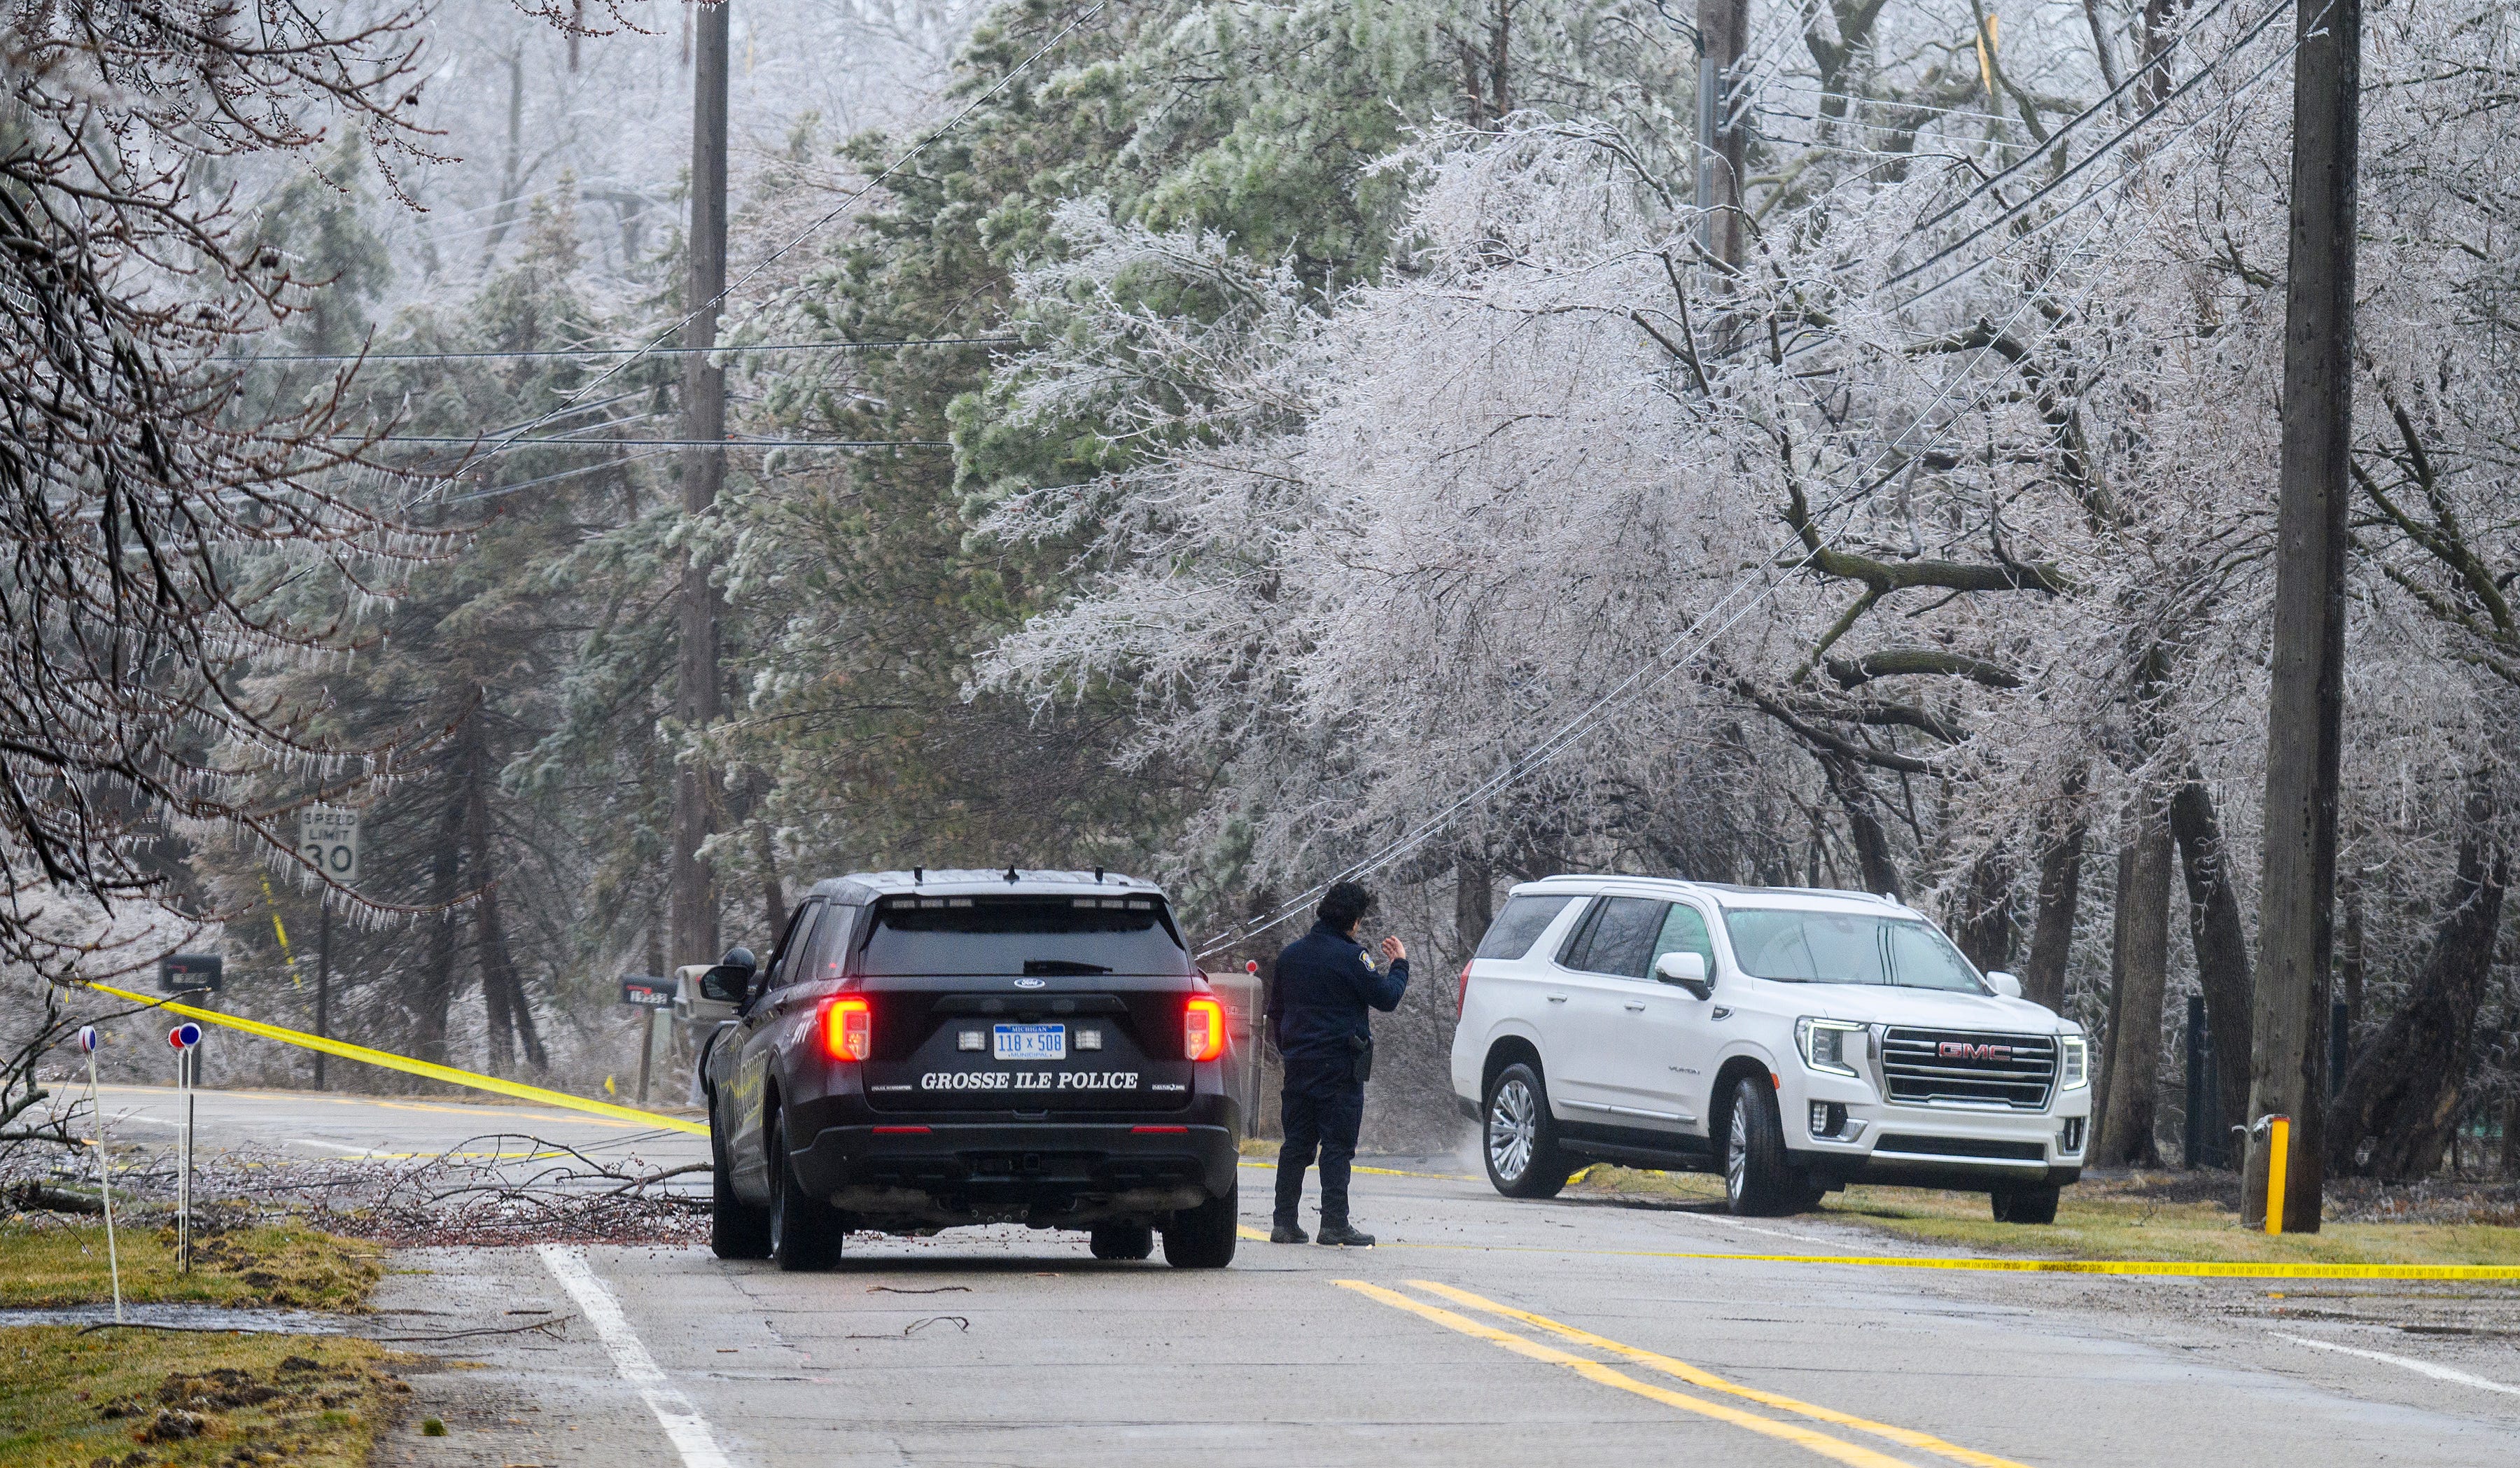 Officer Louis Hurtado of the Grosse Ile Police Department directs a car under a downed secondary power line on Parke Lane on Grosse Ile, Thursday, February 23, 2023.